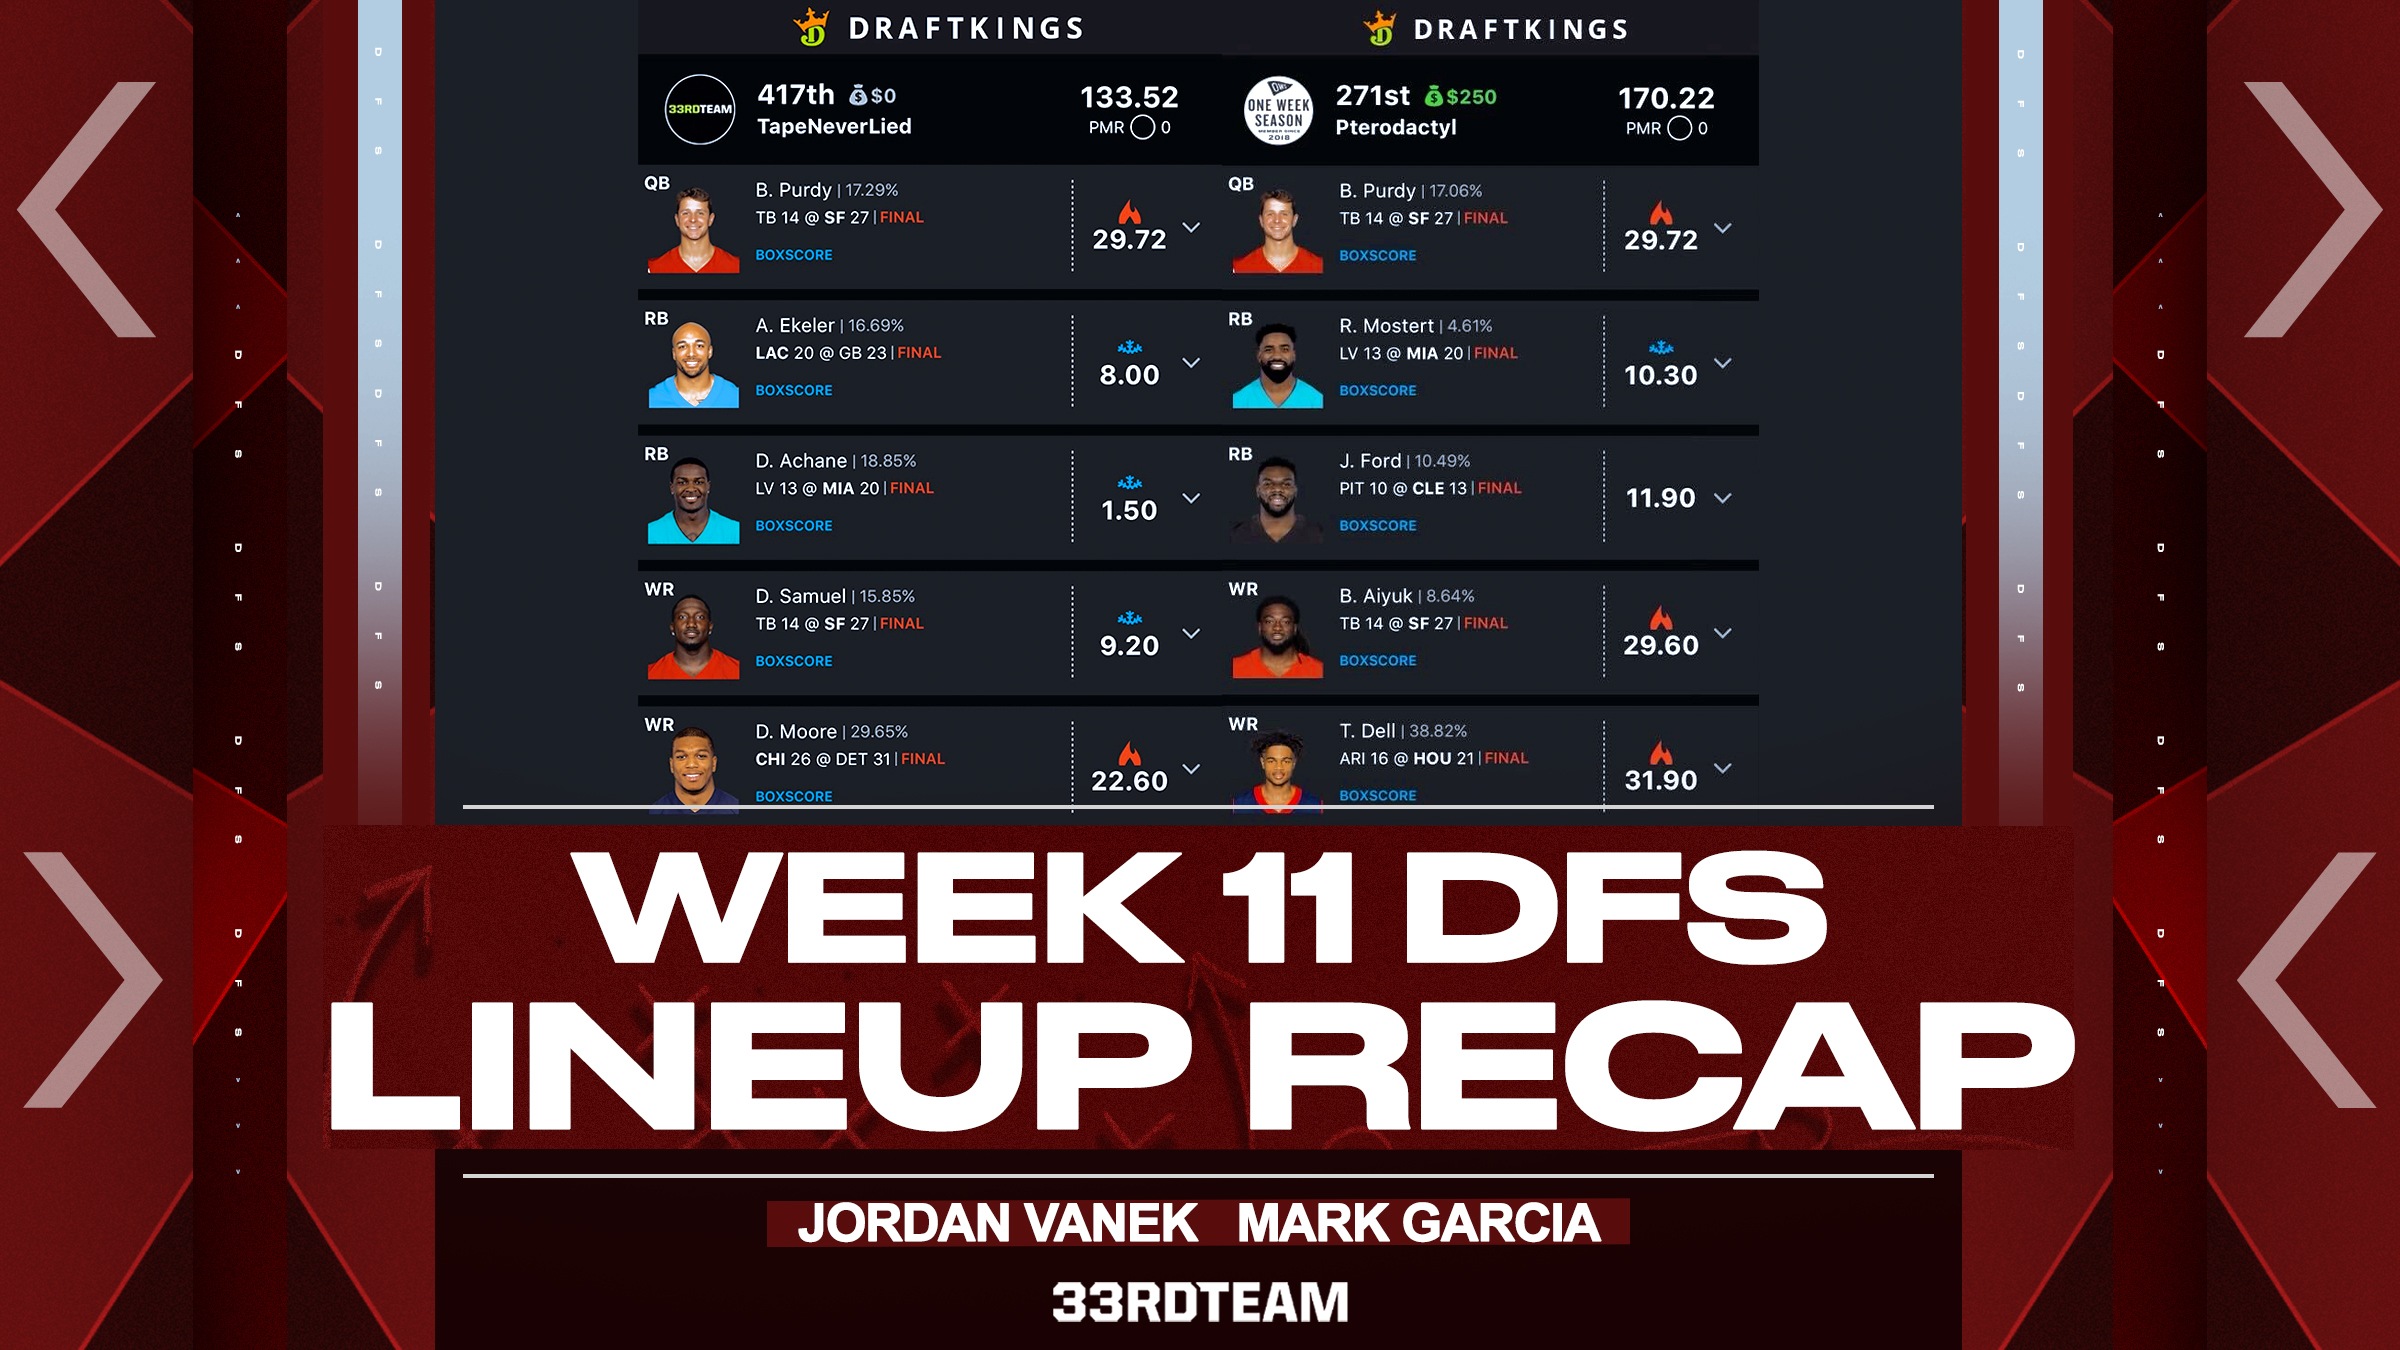 Two DraftKings lineups with text that reads "Week 11 DFS Lineup Recap"